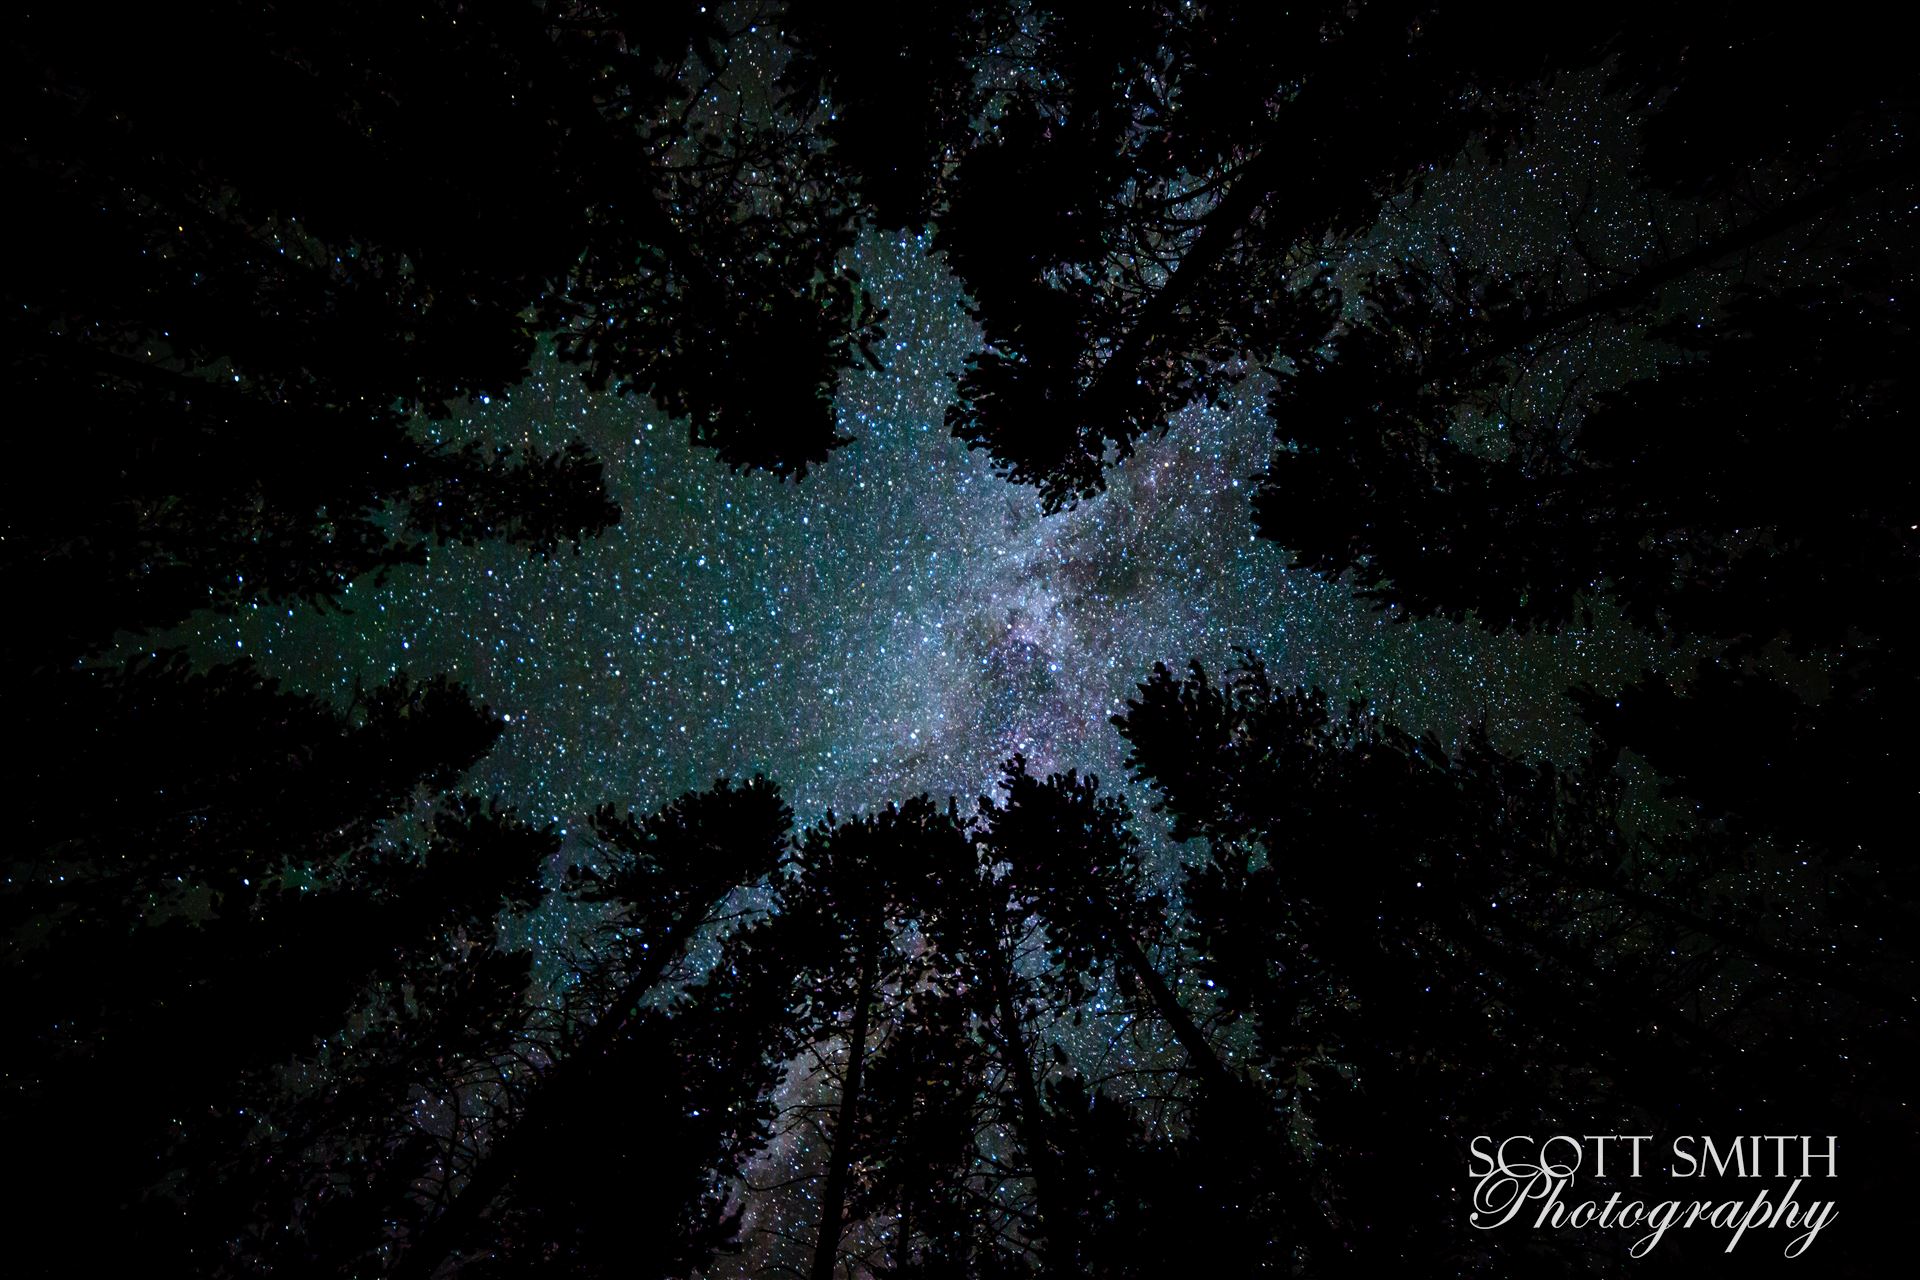 Camping with a View - Landscape A beautiful view of the milky way from our campsite at Turquoise Lake, Leadville Colorado, adjusted for portrait view. by Scott Smith Photos